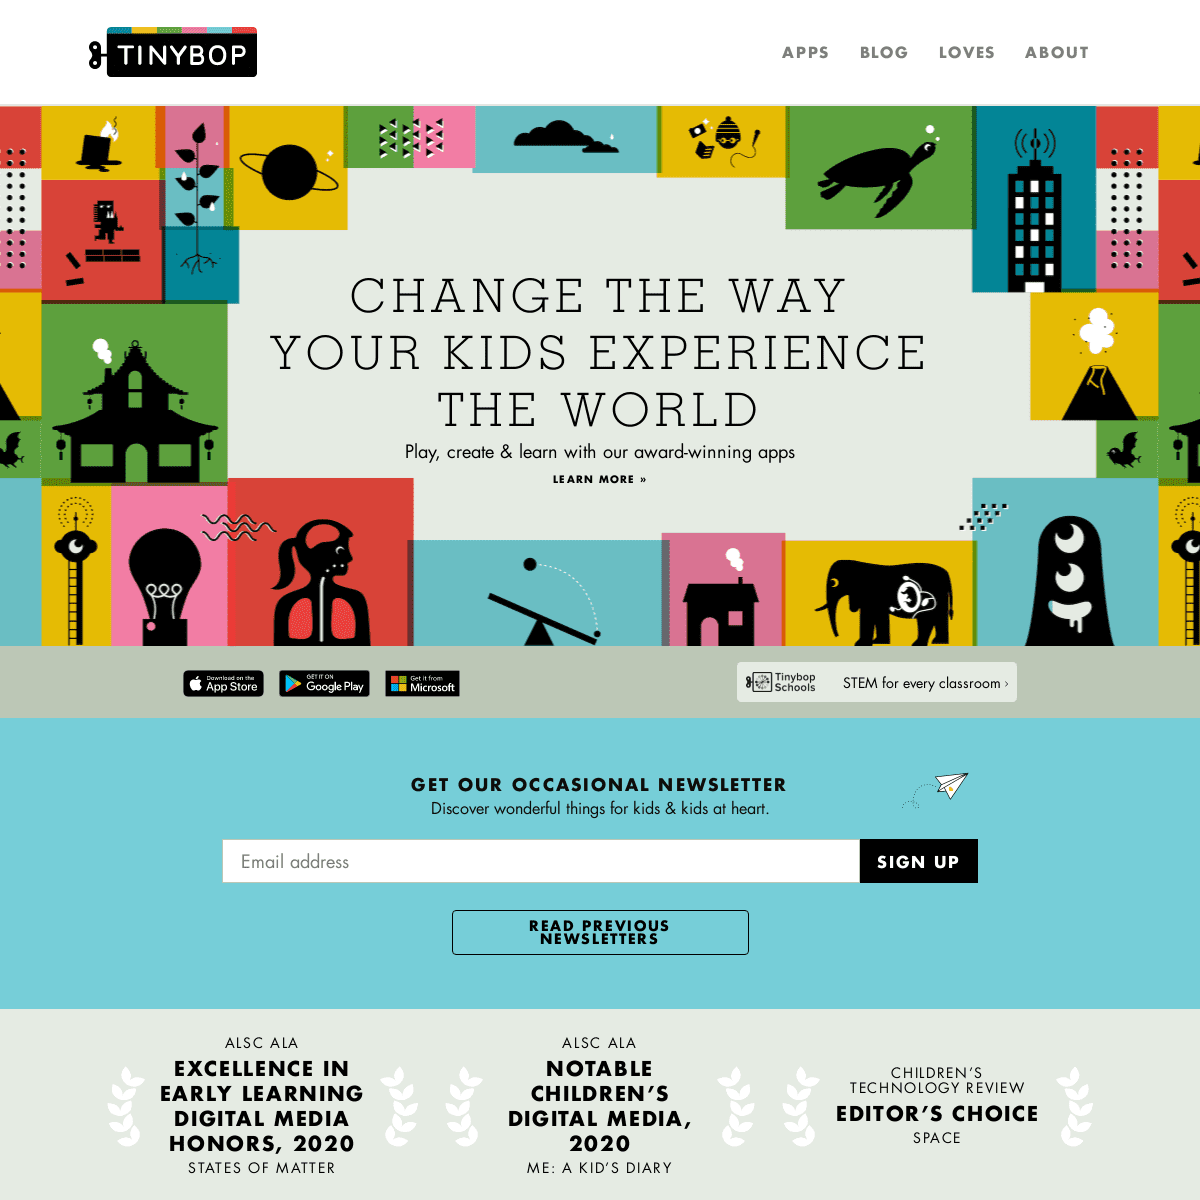 Change the way your kids experience the world - Tinybop